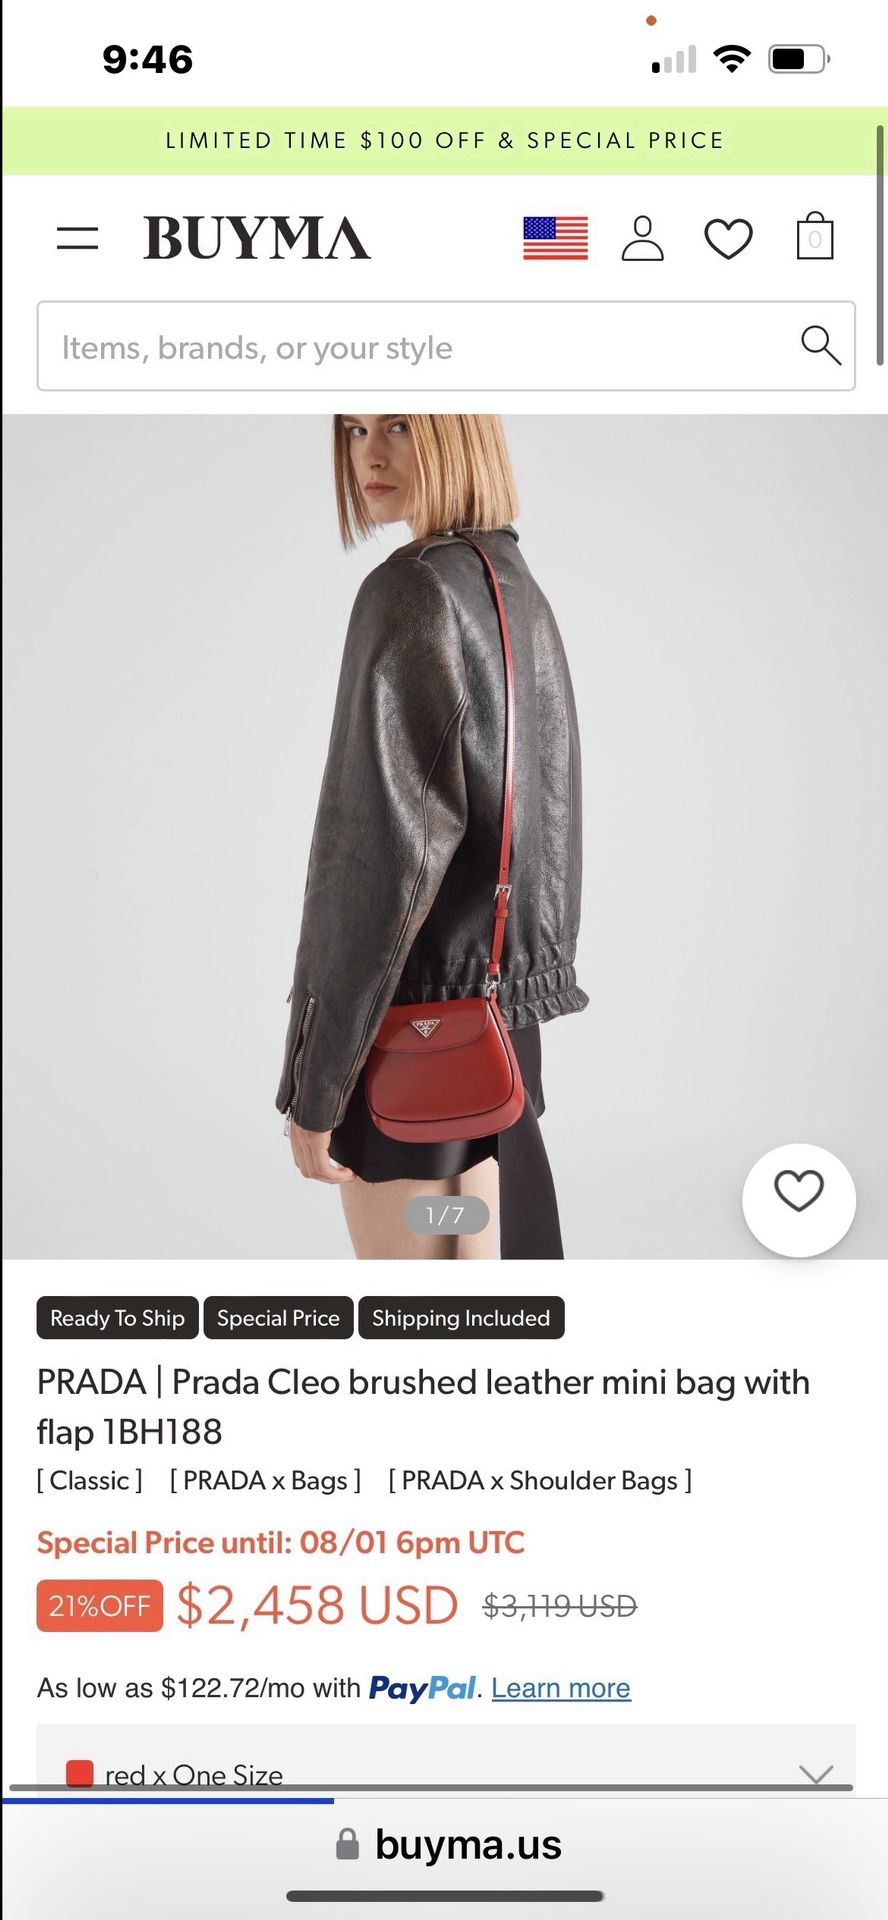 Prada Cleo Brushed Leather Mini Bag with Flap 1BH188, Red, One Size